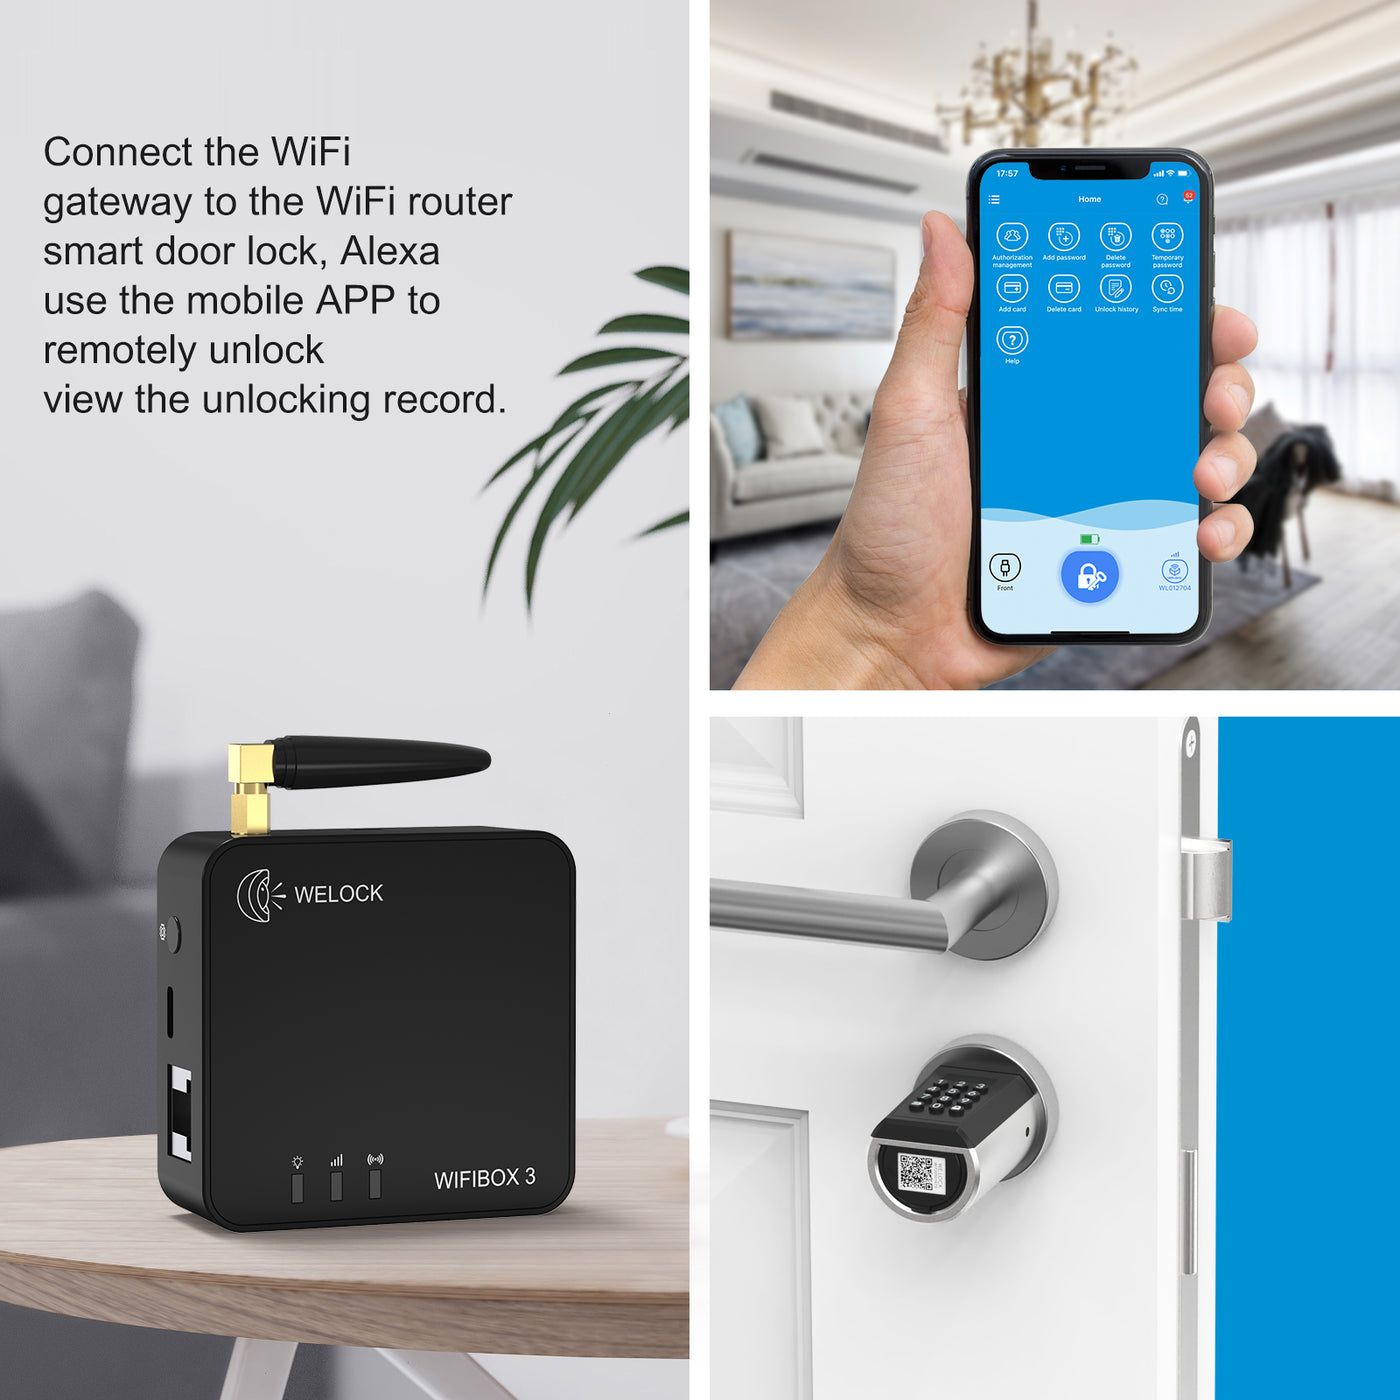 Welock Smart lock wifibox for Home Remote Unlocking and Connection with Alexa Wifi Gateway